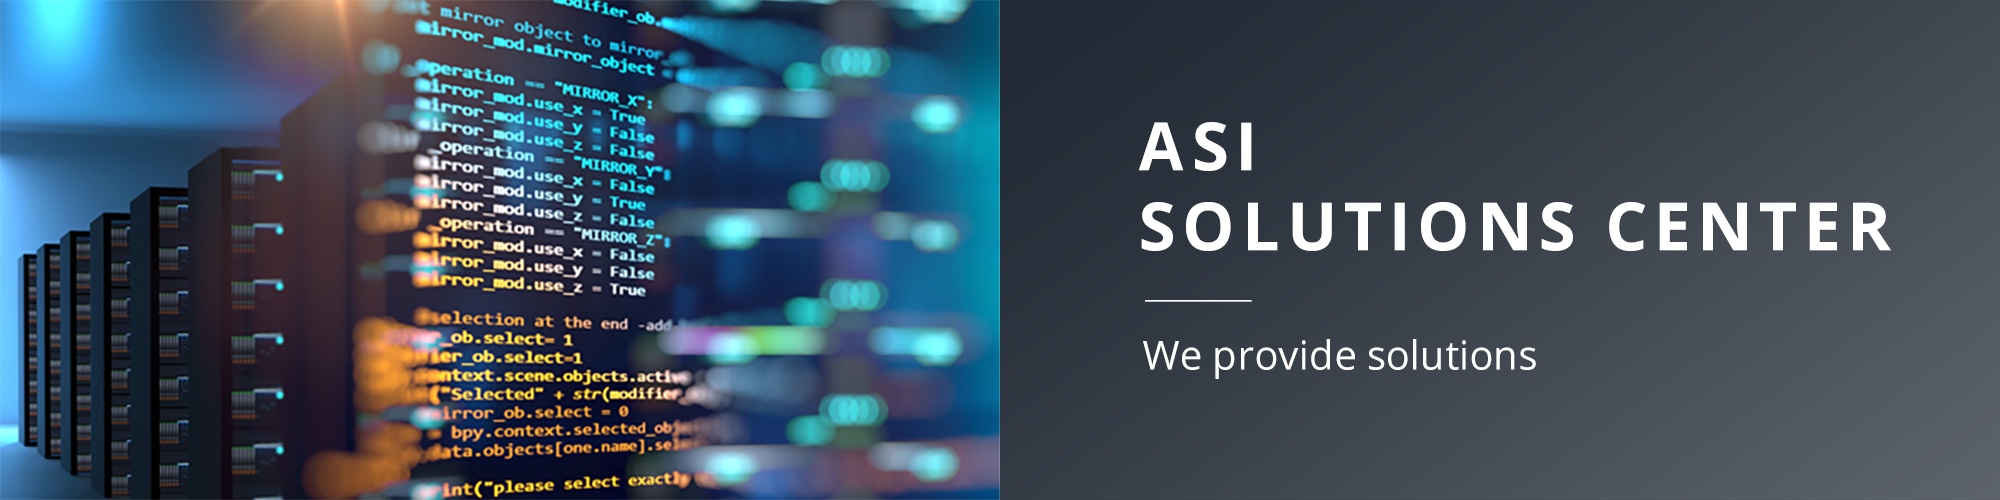 ASI Solutions Center